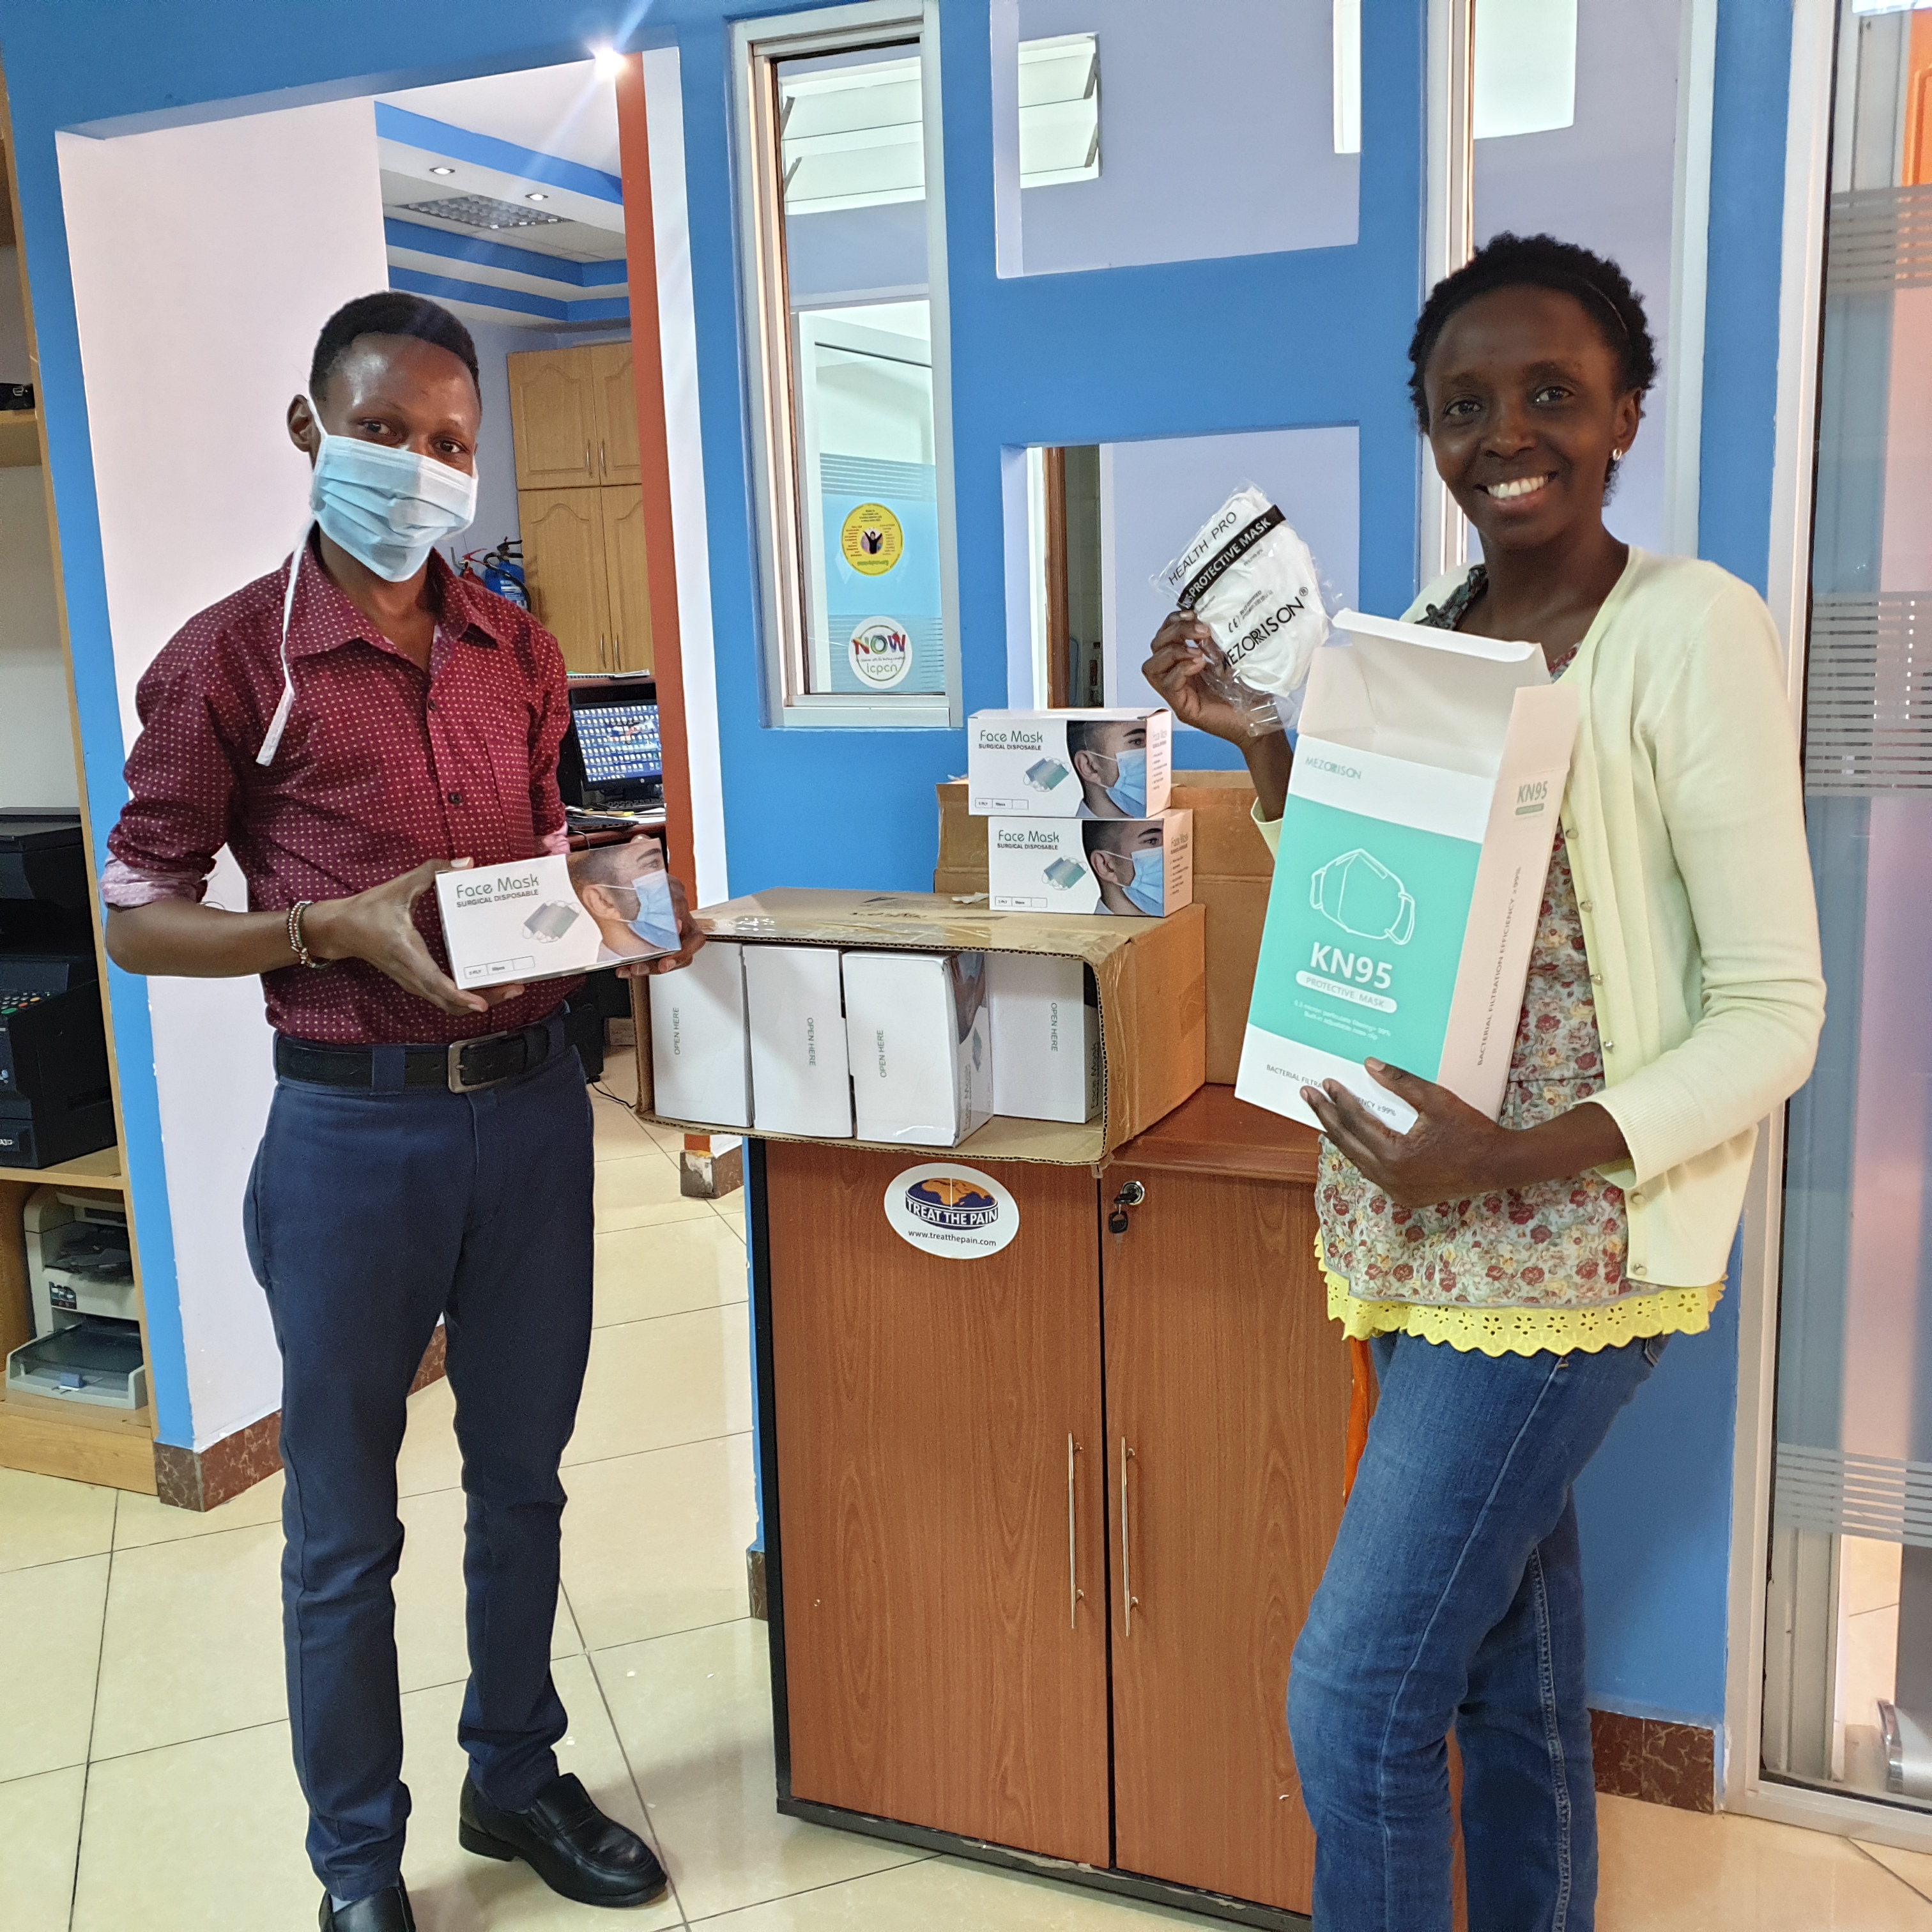 Early in the pandemic, hospices had difficulty in securing PPE in order to continue delivering essential services. GPIC partnered with KEHPCA to ensure that hospices throughout the country received a supply of essential PPE.